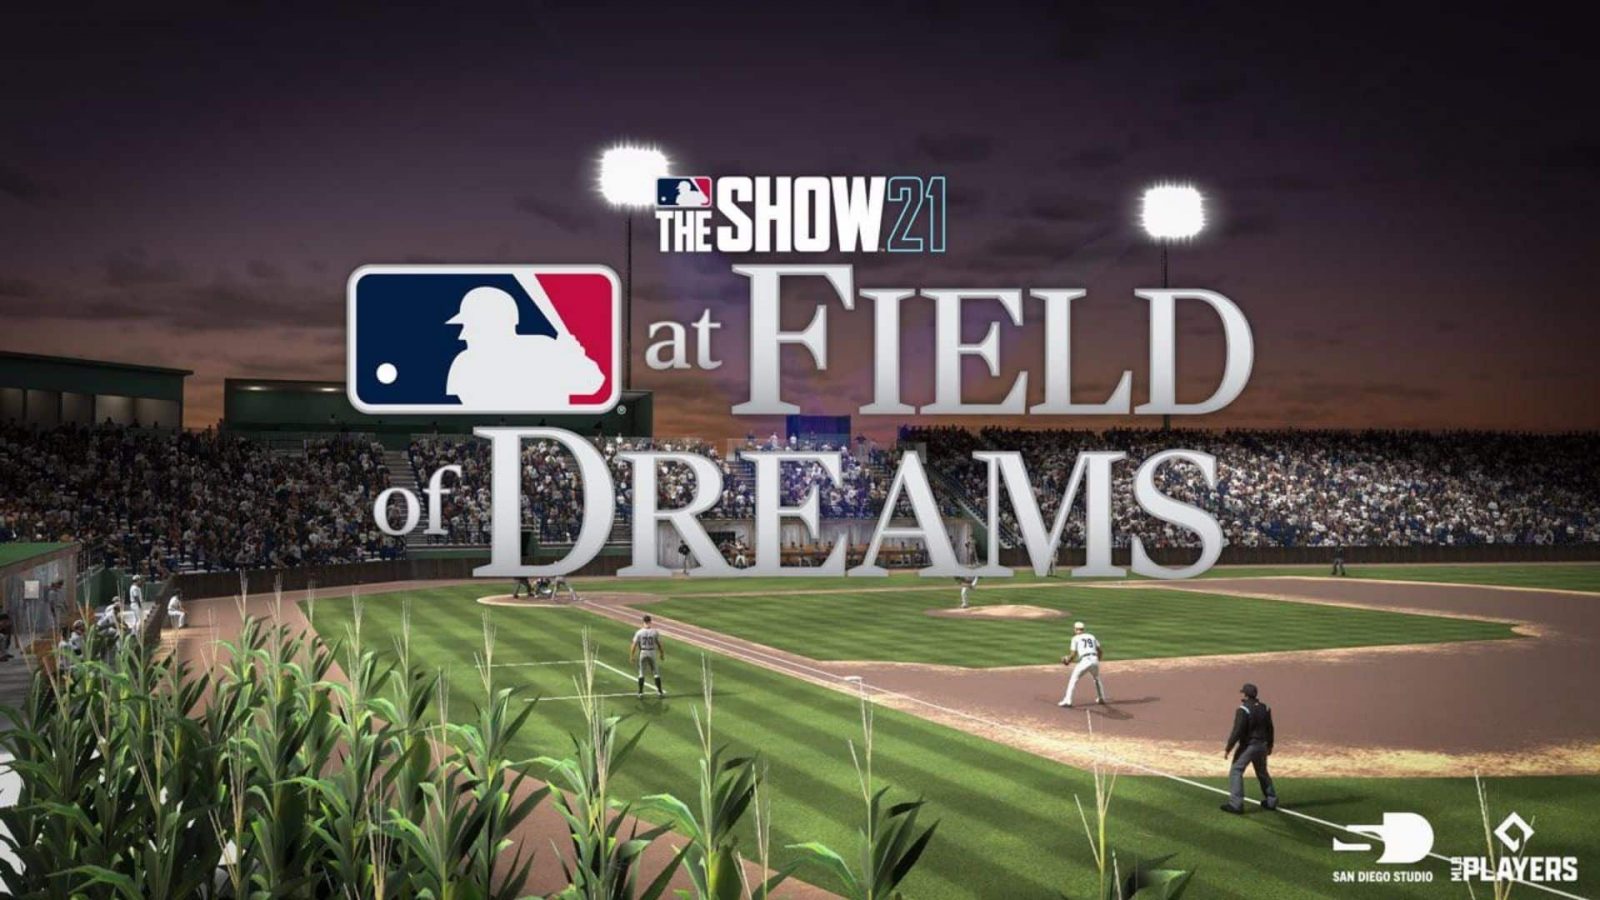 Legends exceeds merch sales expectations at Field of Dreams game